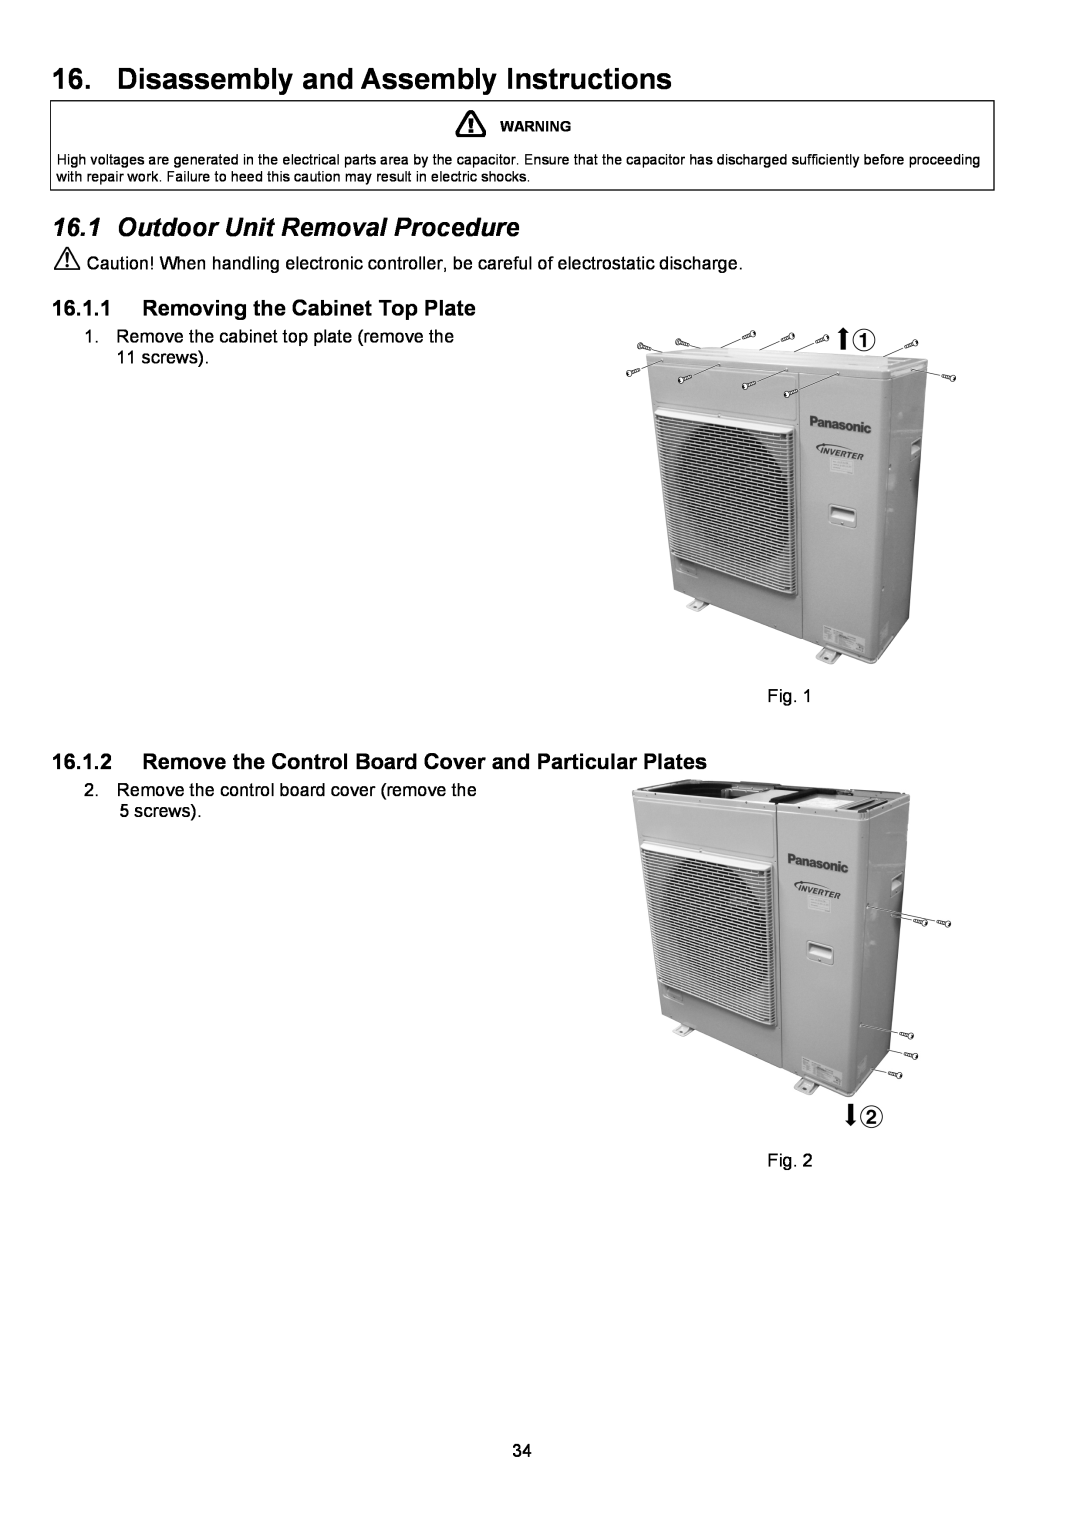 Panasonic CU-5E36QBU service manual Disassembly and Assembly Instructions, Outdoor Unit Removal Procedure, Fig 